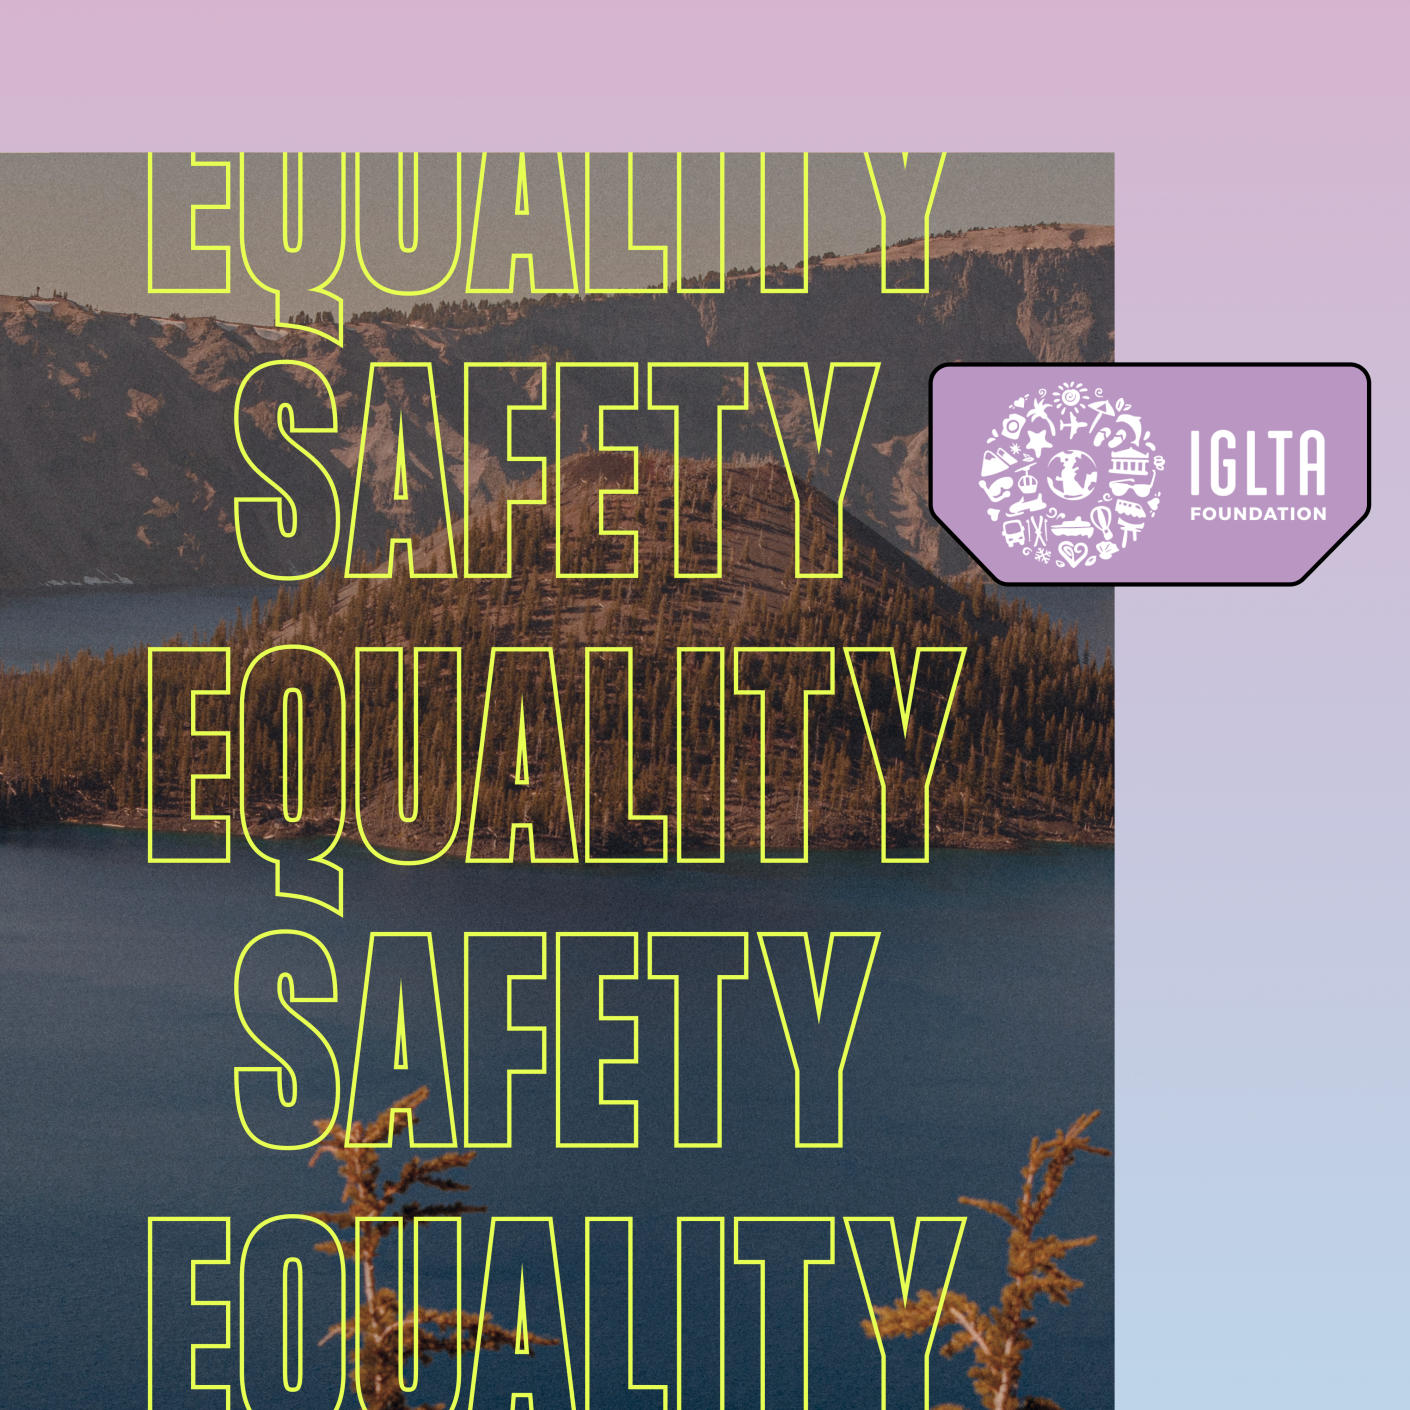 Words Equality and Safety repeated over a purple background, with the IGLTA foundation logo